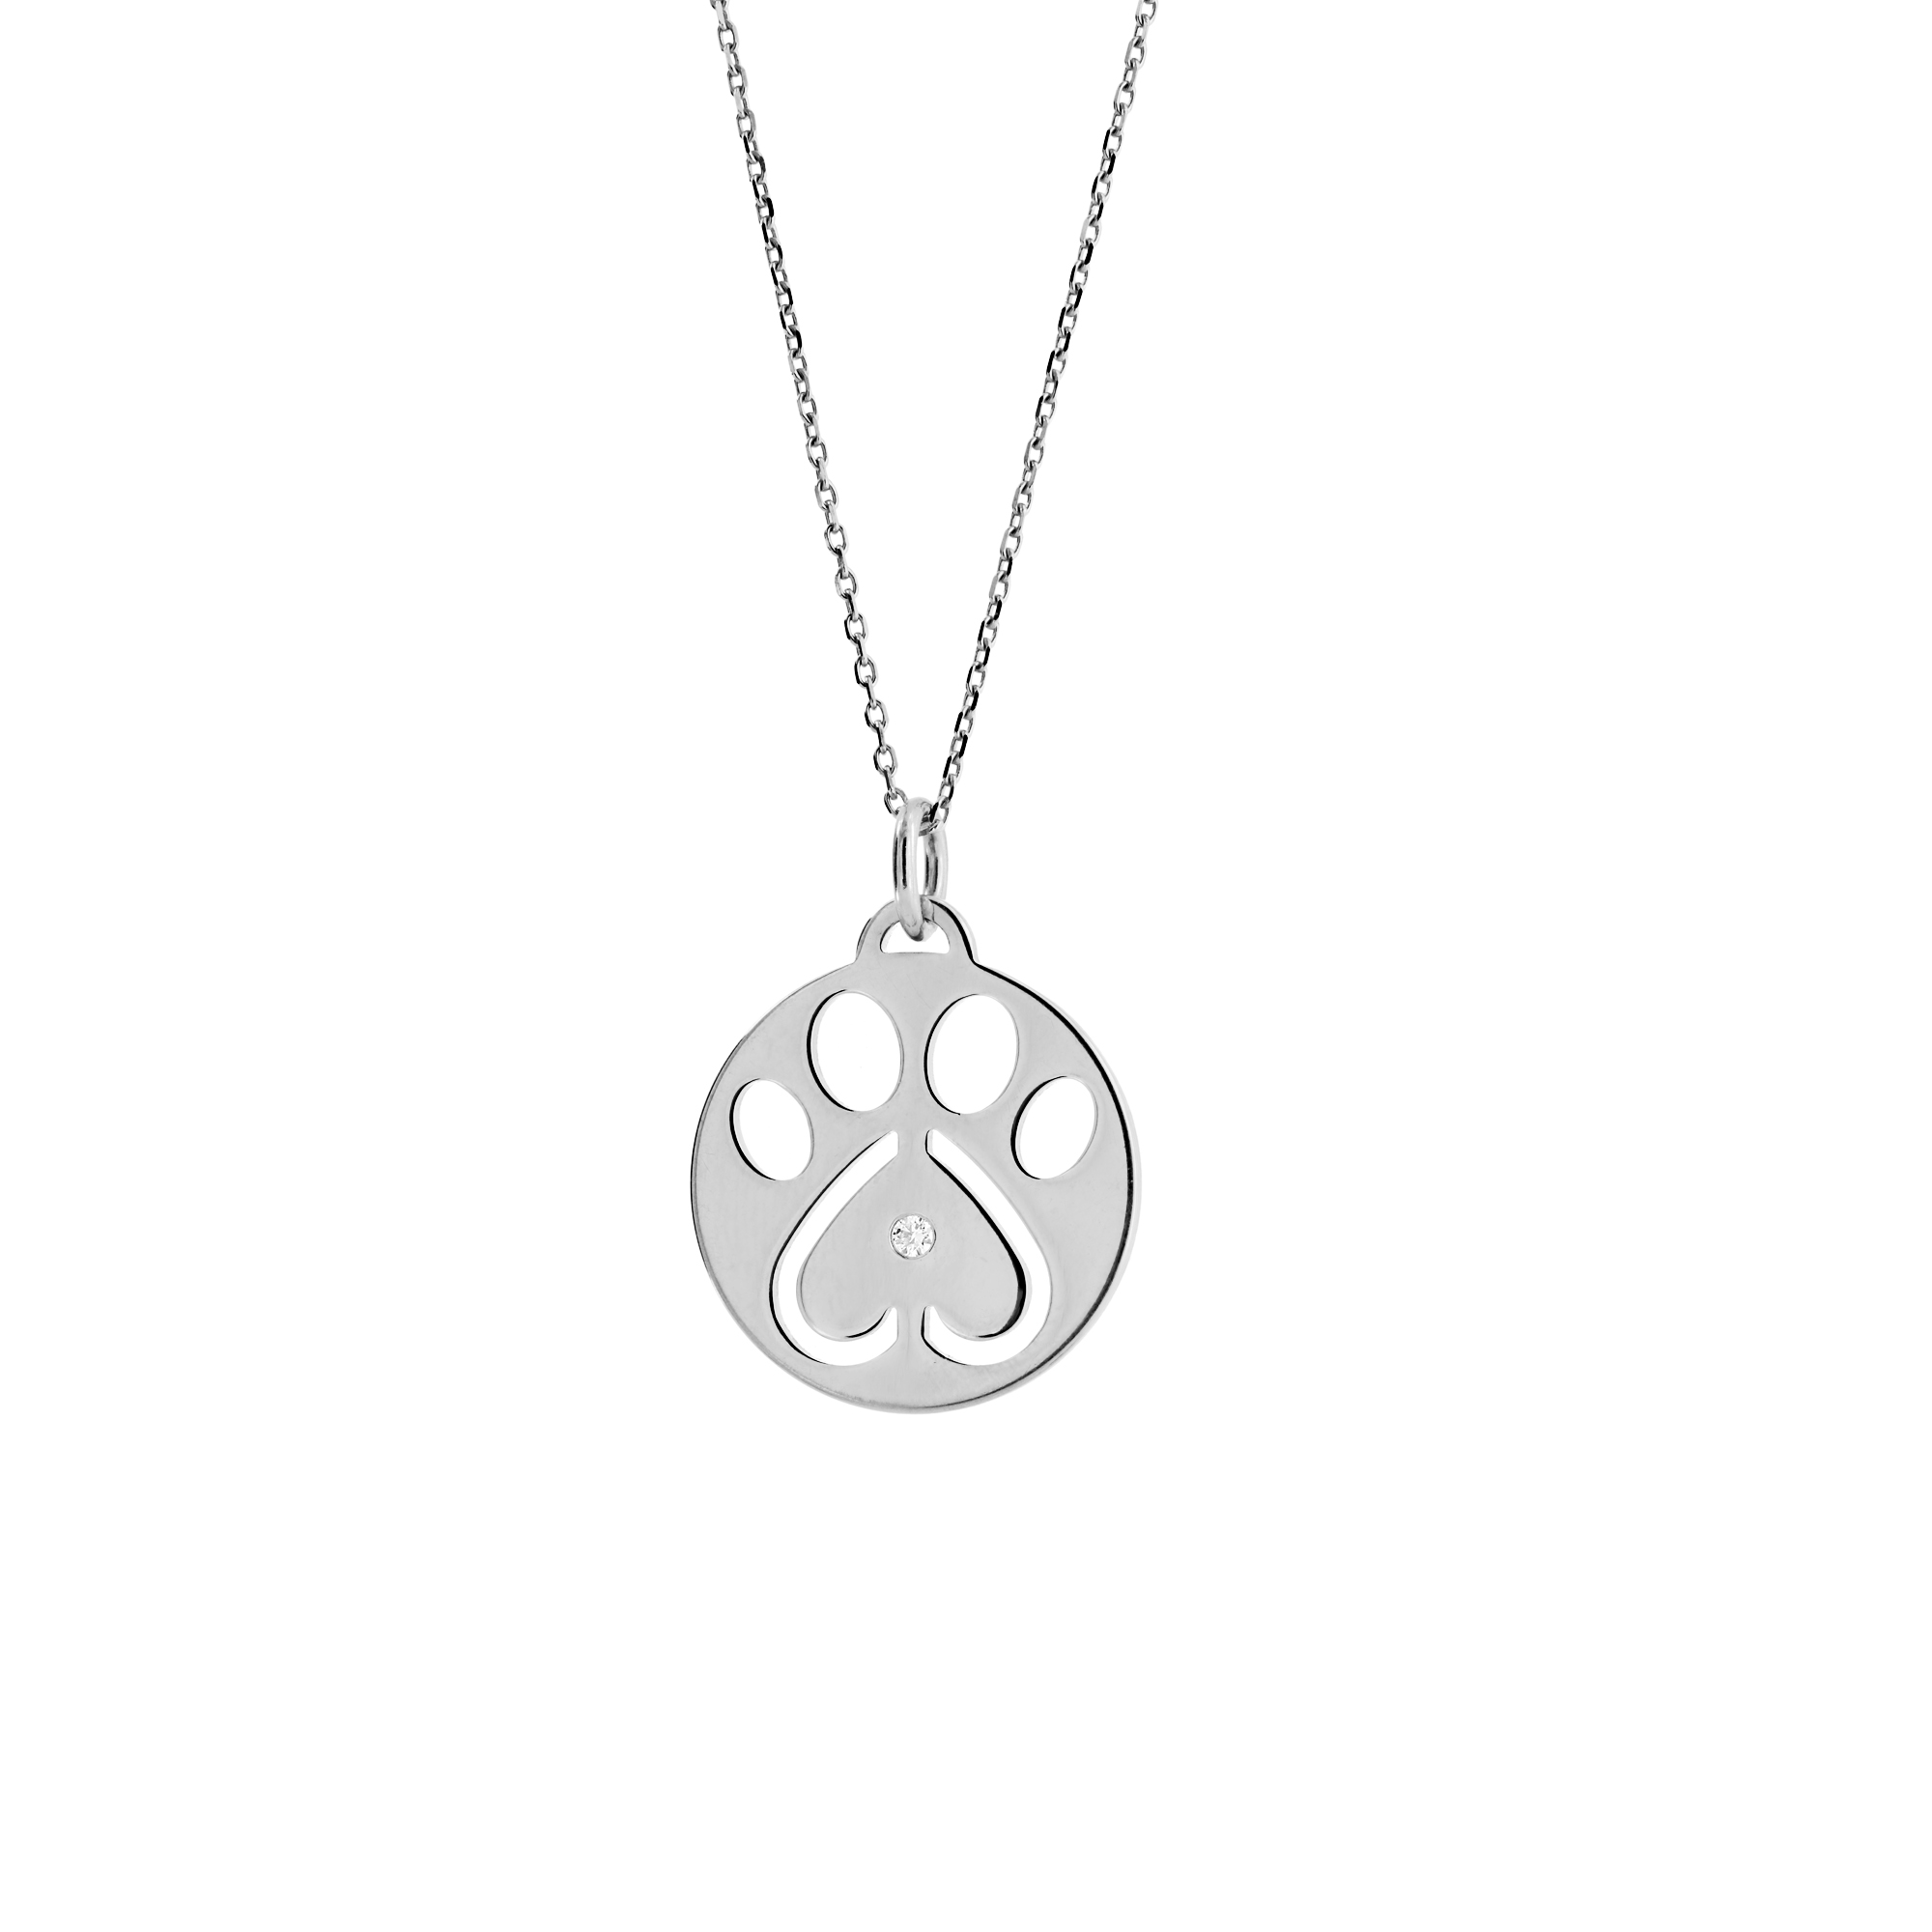 Our Cause for Paws Sterling Silver Open Locket Pendant Necklace